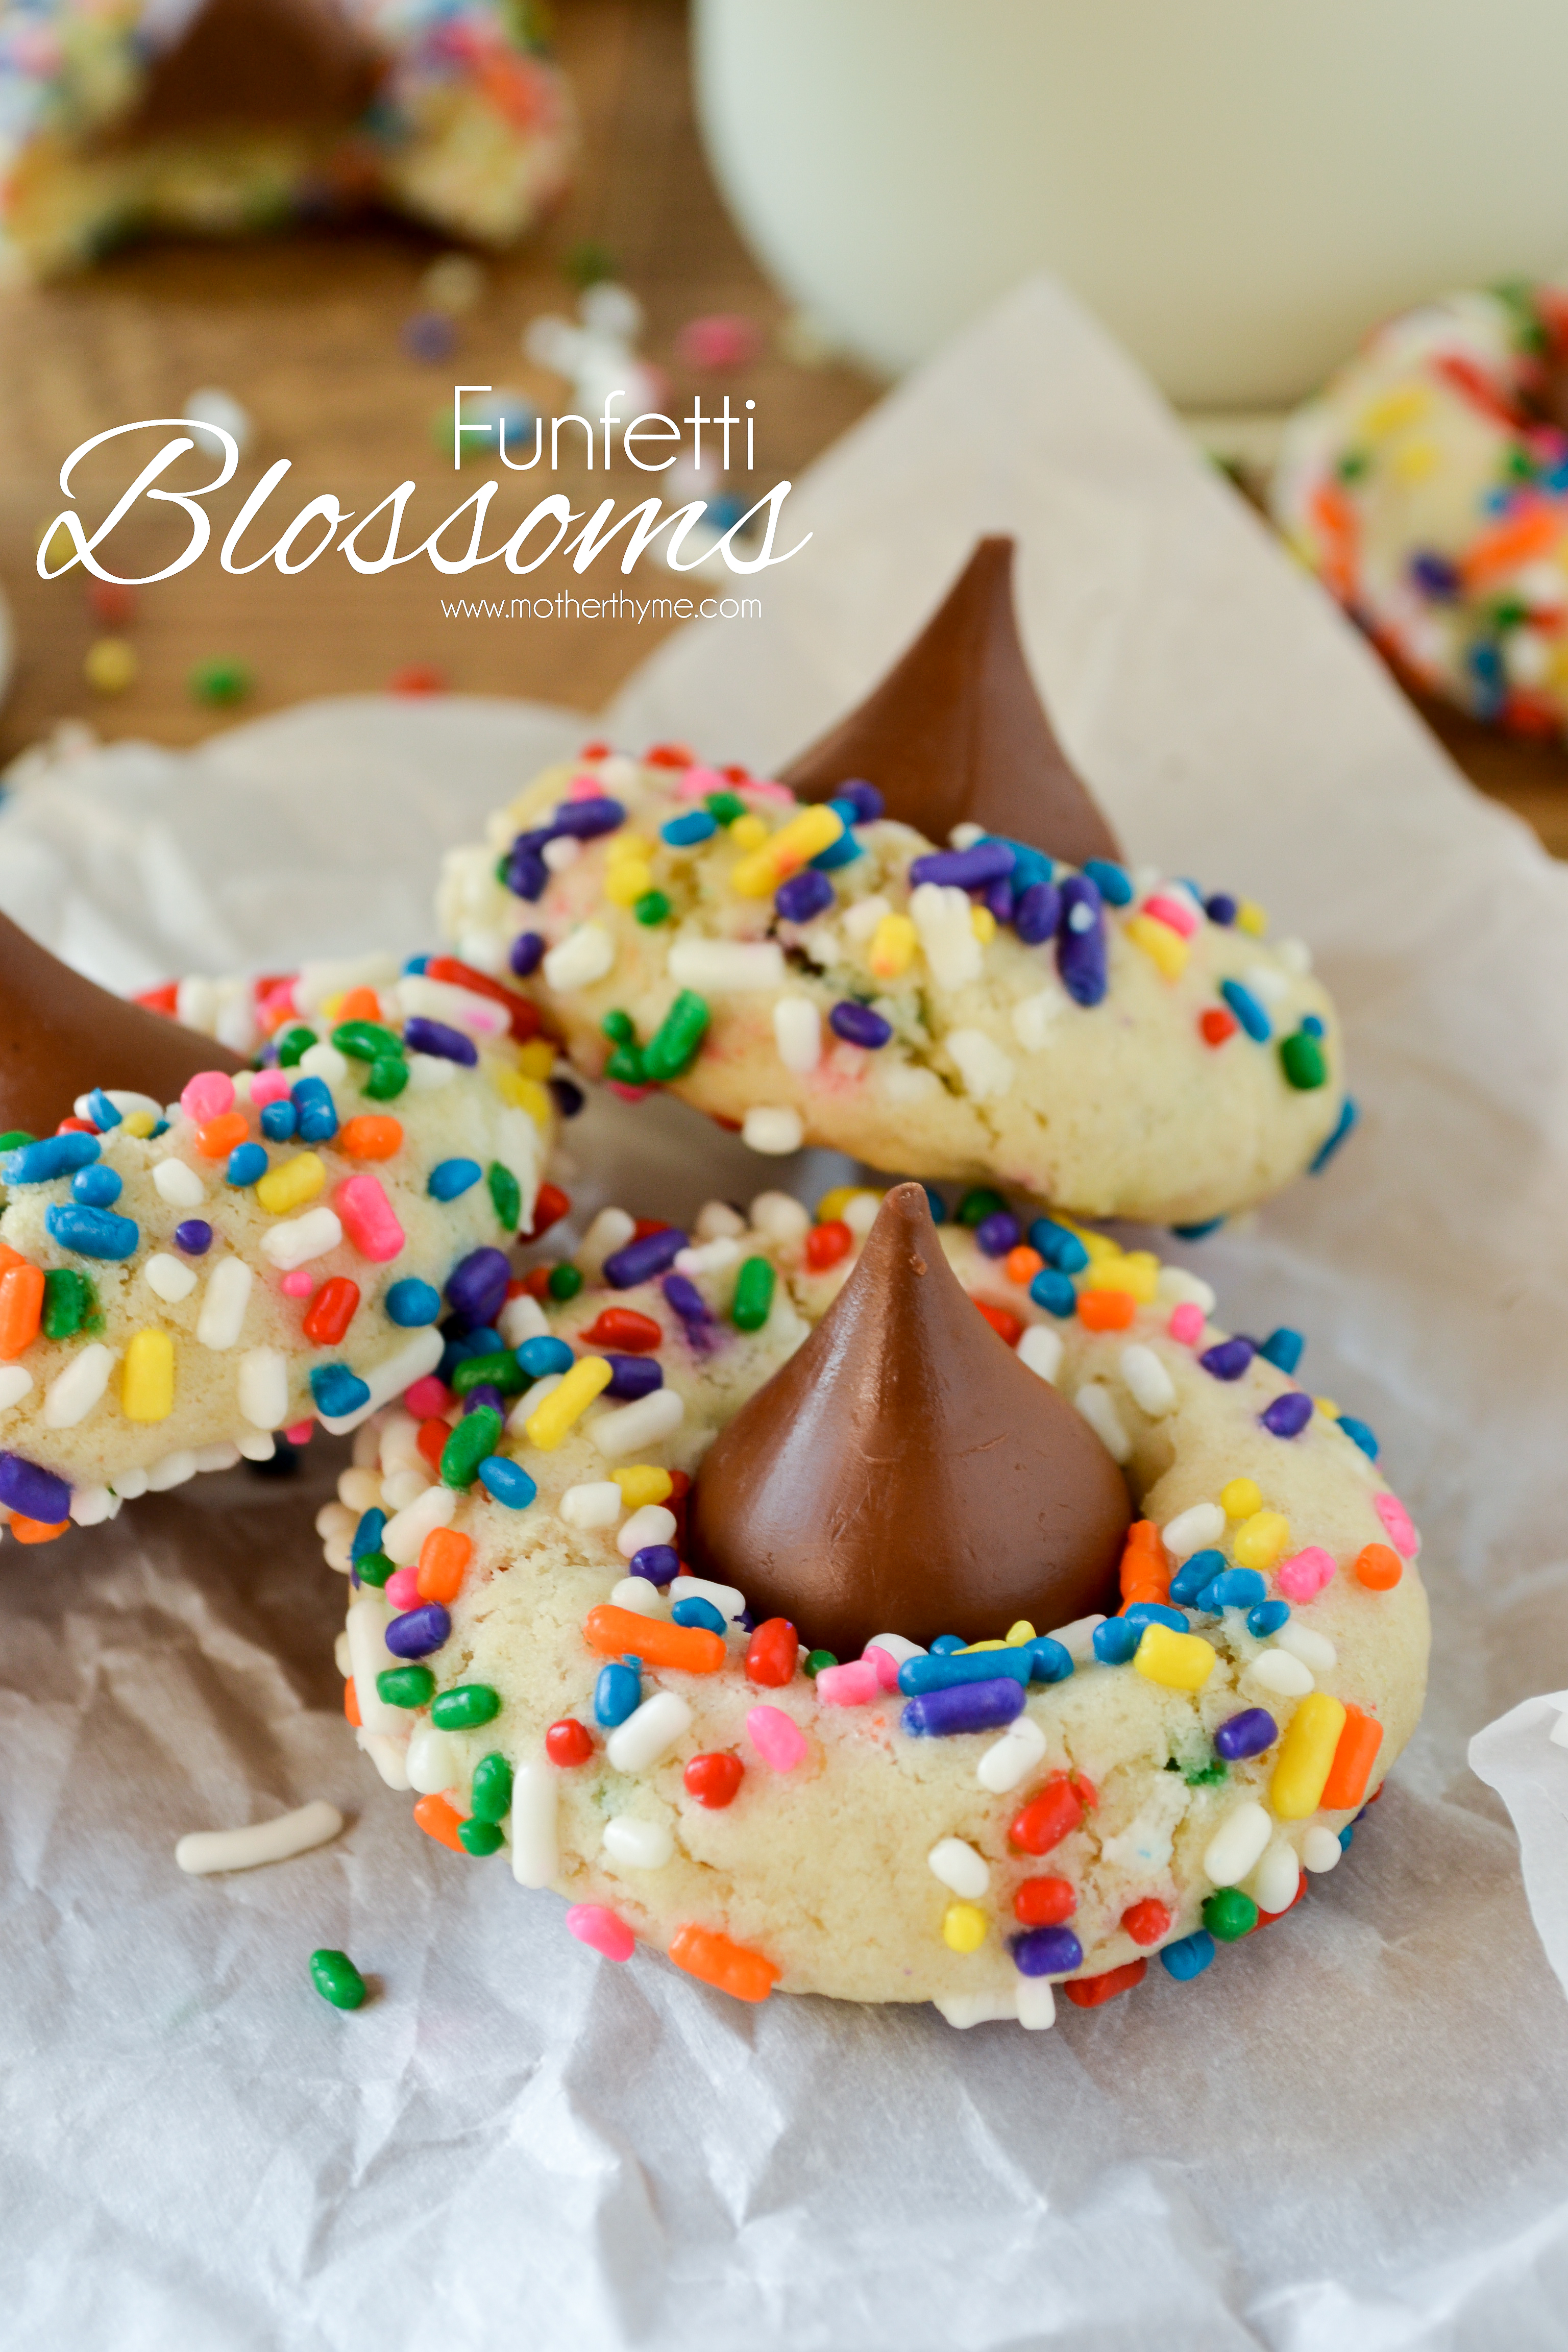 Funfetti Blossoms plus Kindle Fire HD Giveaway!